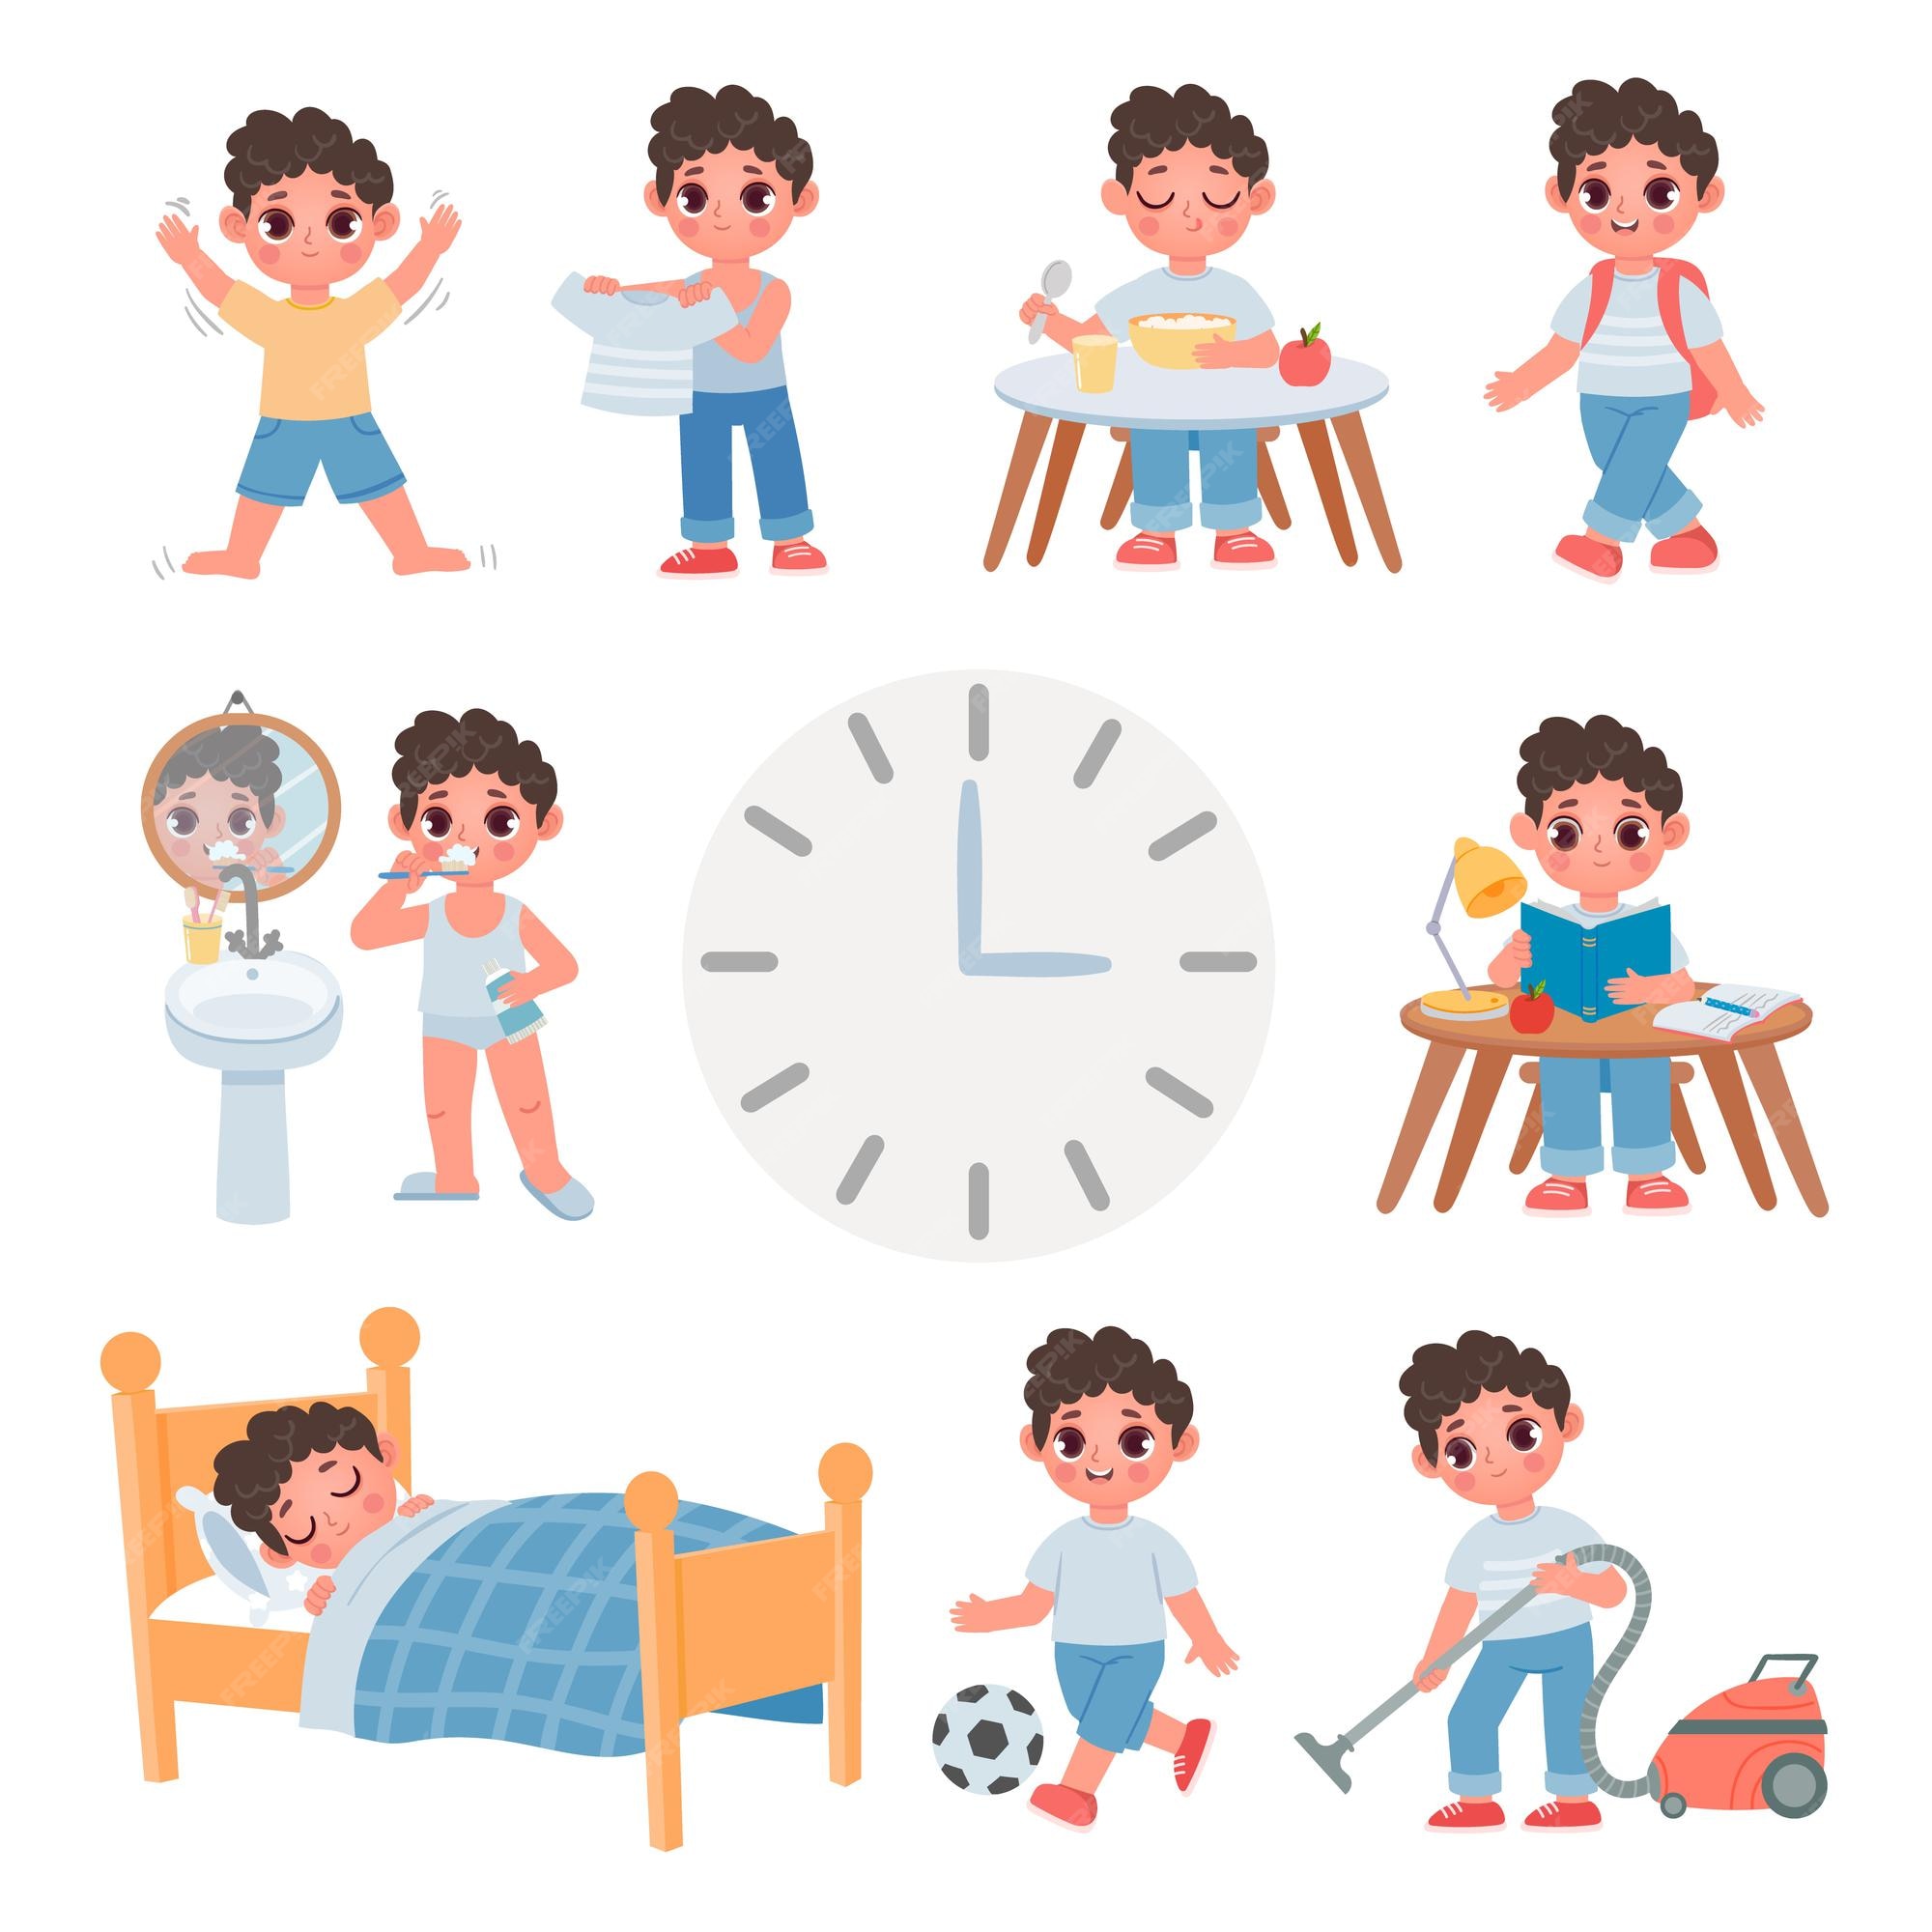 daily routine clipart pictures free